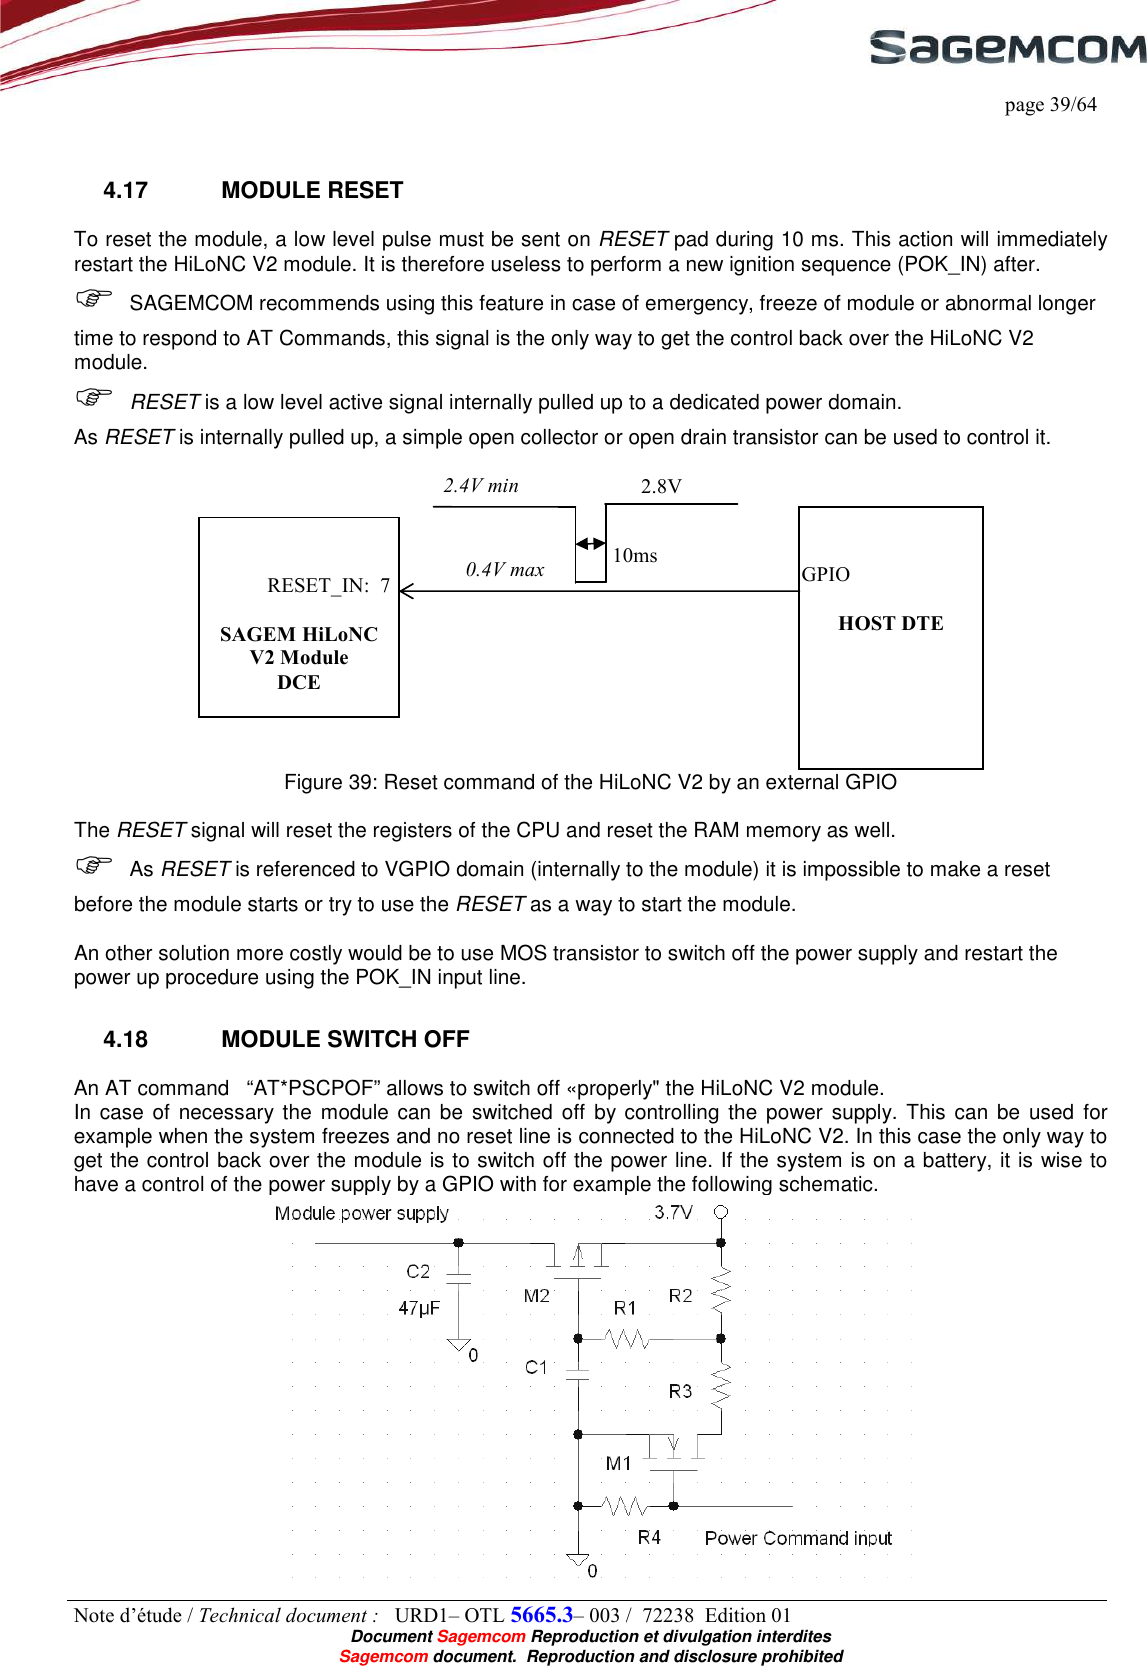     page 39/64 Note d’étude / Technical document :   URD1– OTL 5665.3– 003 /  72238  Edition 01  Document Sagemcom Reproduction et divulgation interdites Sagemcom document.  Reproduction and disclosure prohibited  4.17  MODULE RESET To reset the module, a low level pulse must be sent on RESET pad during 10 ms. This action will immediately restart the HiLoNC V2 module. It is therefore useless to perform a new ignition sequence (POK_IN) after.  SAGEMCOM recommends using this feature in case of emergency, freeze of module or abnormal longer time to respond to AT Commands, this signal is the only way to get the control back over the HiLoNC V2 module.  RESET is a low level active signal internally pulled up to a dedicated power domain. As RESET is internally pulled up, a simple open collector or open drain transistor can be used to control it.   Figure 39: Reset command of the HiLoNC V2 by an external GPIO  The RESET signal will reset the registers of the CPU and reset the RAM memory as well.  As RESET is referenced to VGPIO domain (internally to the module) it is impossible to make a reset before the module starts or try to use the RESET as a way to start the module.  An other solution more costly would be to use MOS transistor to switch off the power supply and restart the power up procedure using the POK_IN input line. 4.18  MODULE SWITCH OFF An AT command   “AT*PSCPOF” allows to switch off «properly&quot; the HiLoNC V2 module. In case of necessary the  module can be  switched off by controlling the power supply. This  can be used  for example when the system freezes and no reset line is connected to the HiLoNC V2. In this case the only way to get the control back over the module is to switch off the power line. If the system is on a battery, it is wise to have a control of the power supply by a GPIO with for example the following schematic.      SAGEM HiLoNC V2 Module DCE     HOST DTE RESET_IN:  7 10ms 2.4V min 0.4V max GPIO 2.8V 